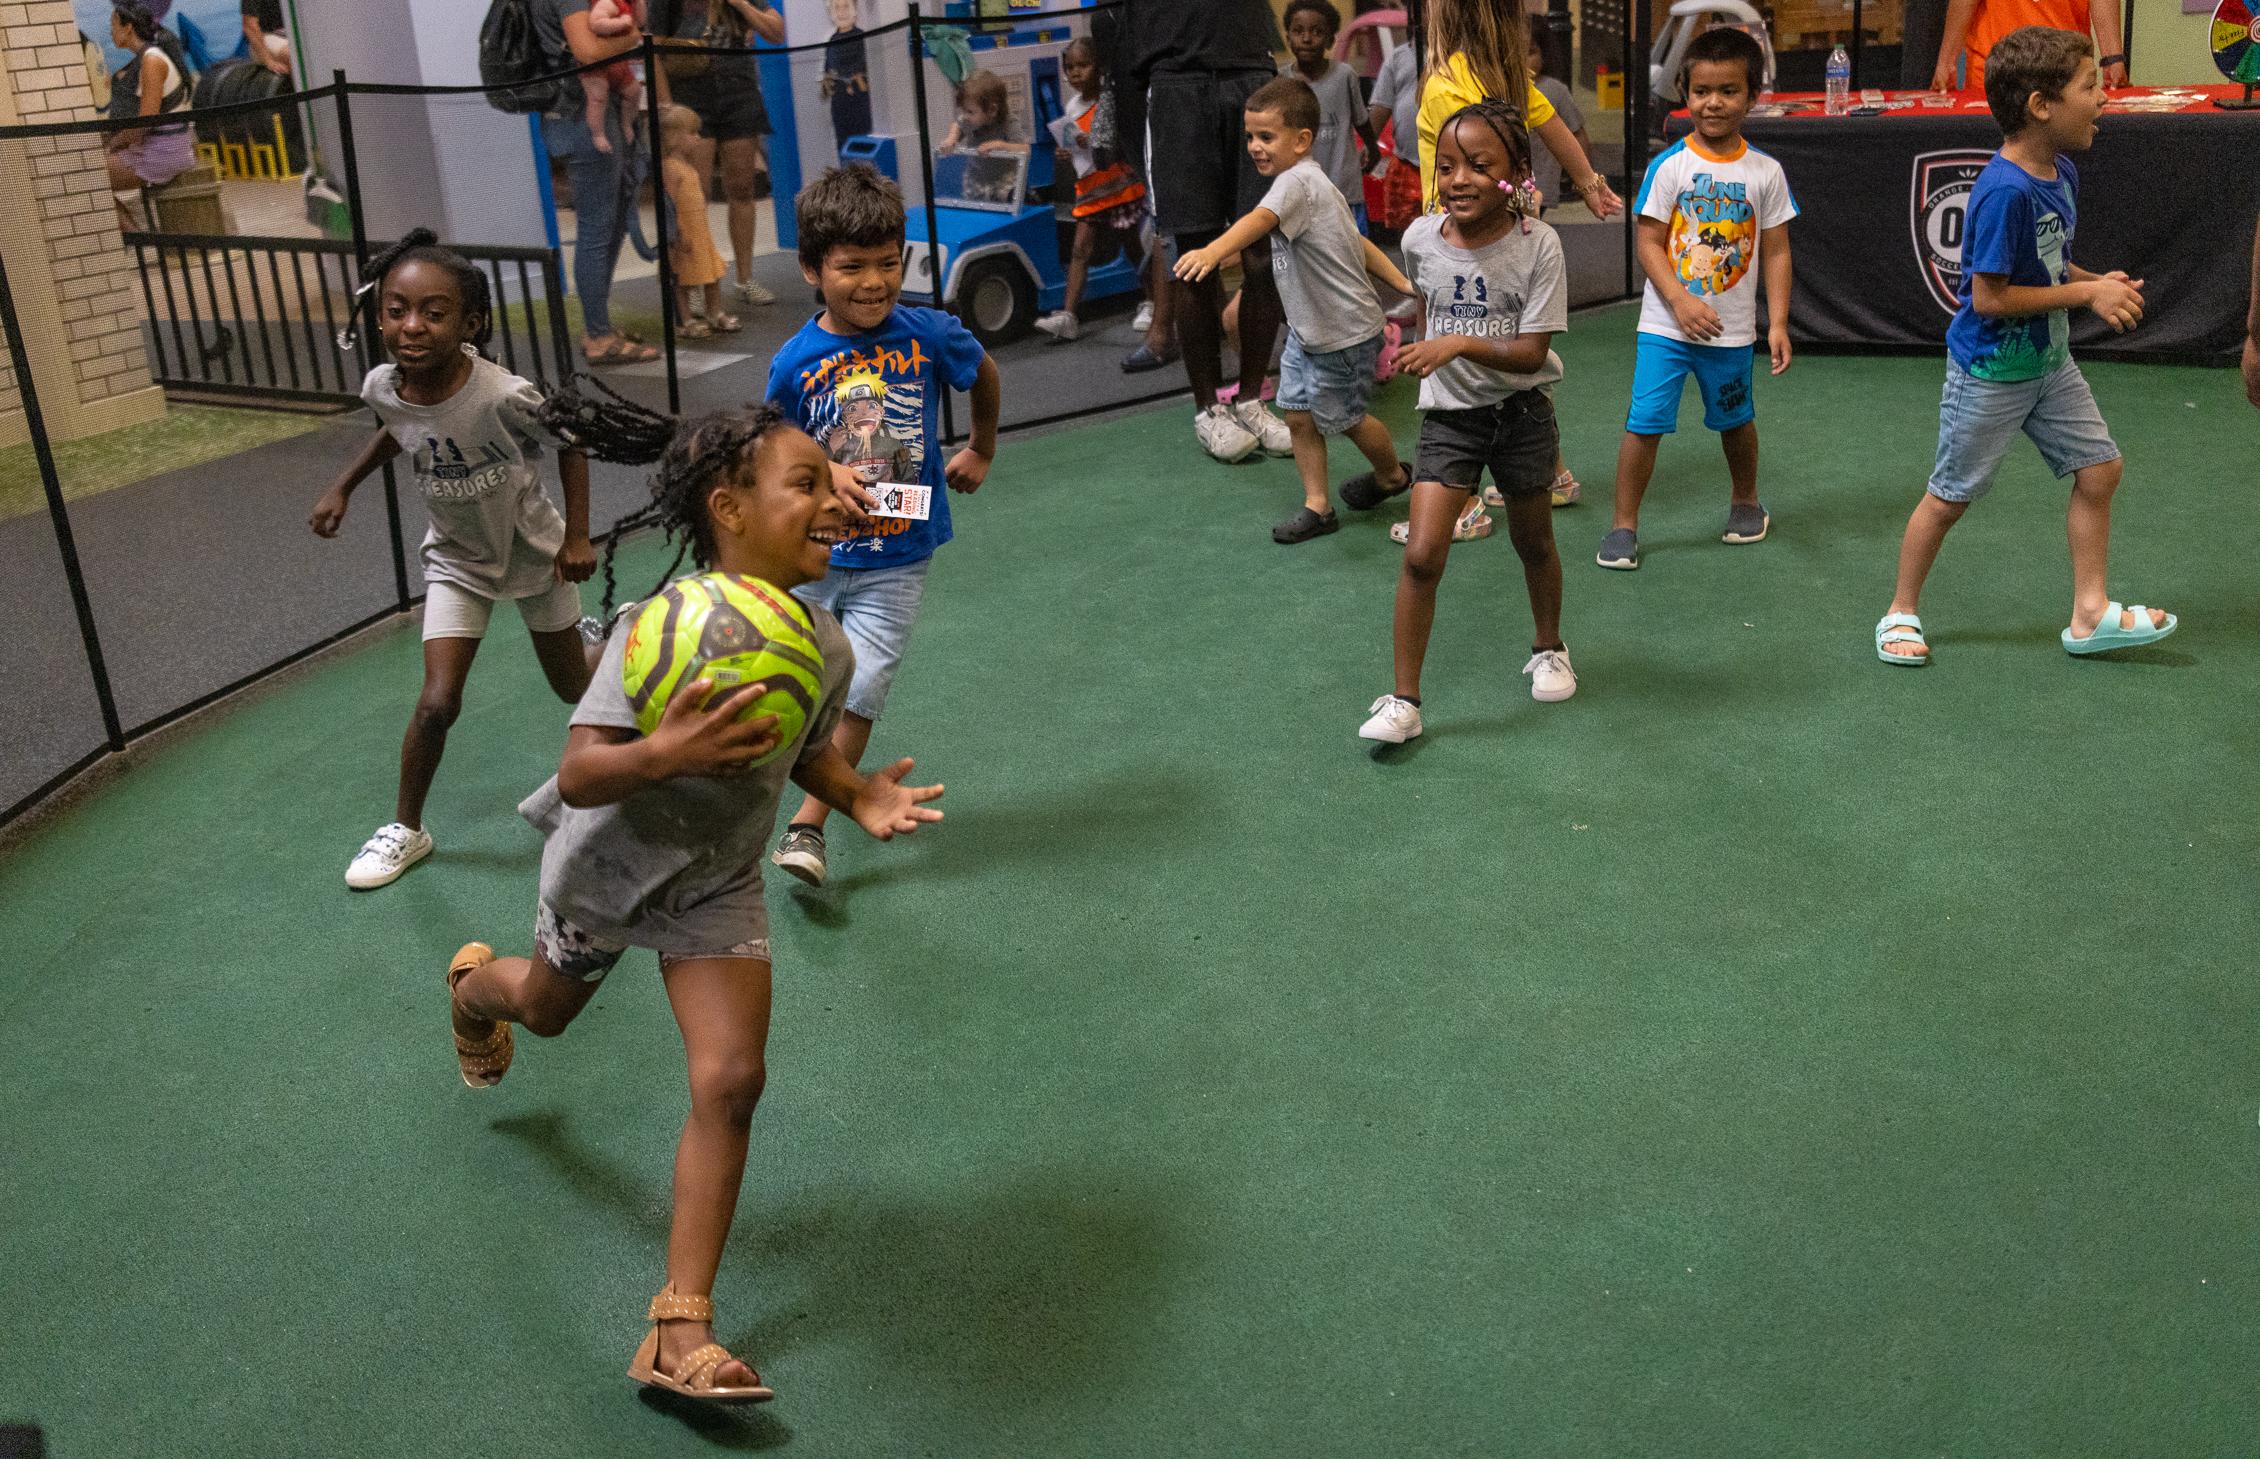 OC Soccer Club Celebrates National Soccer Day by Teaching Children New Moves